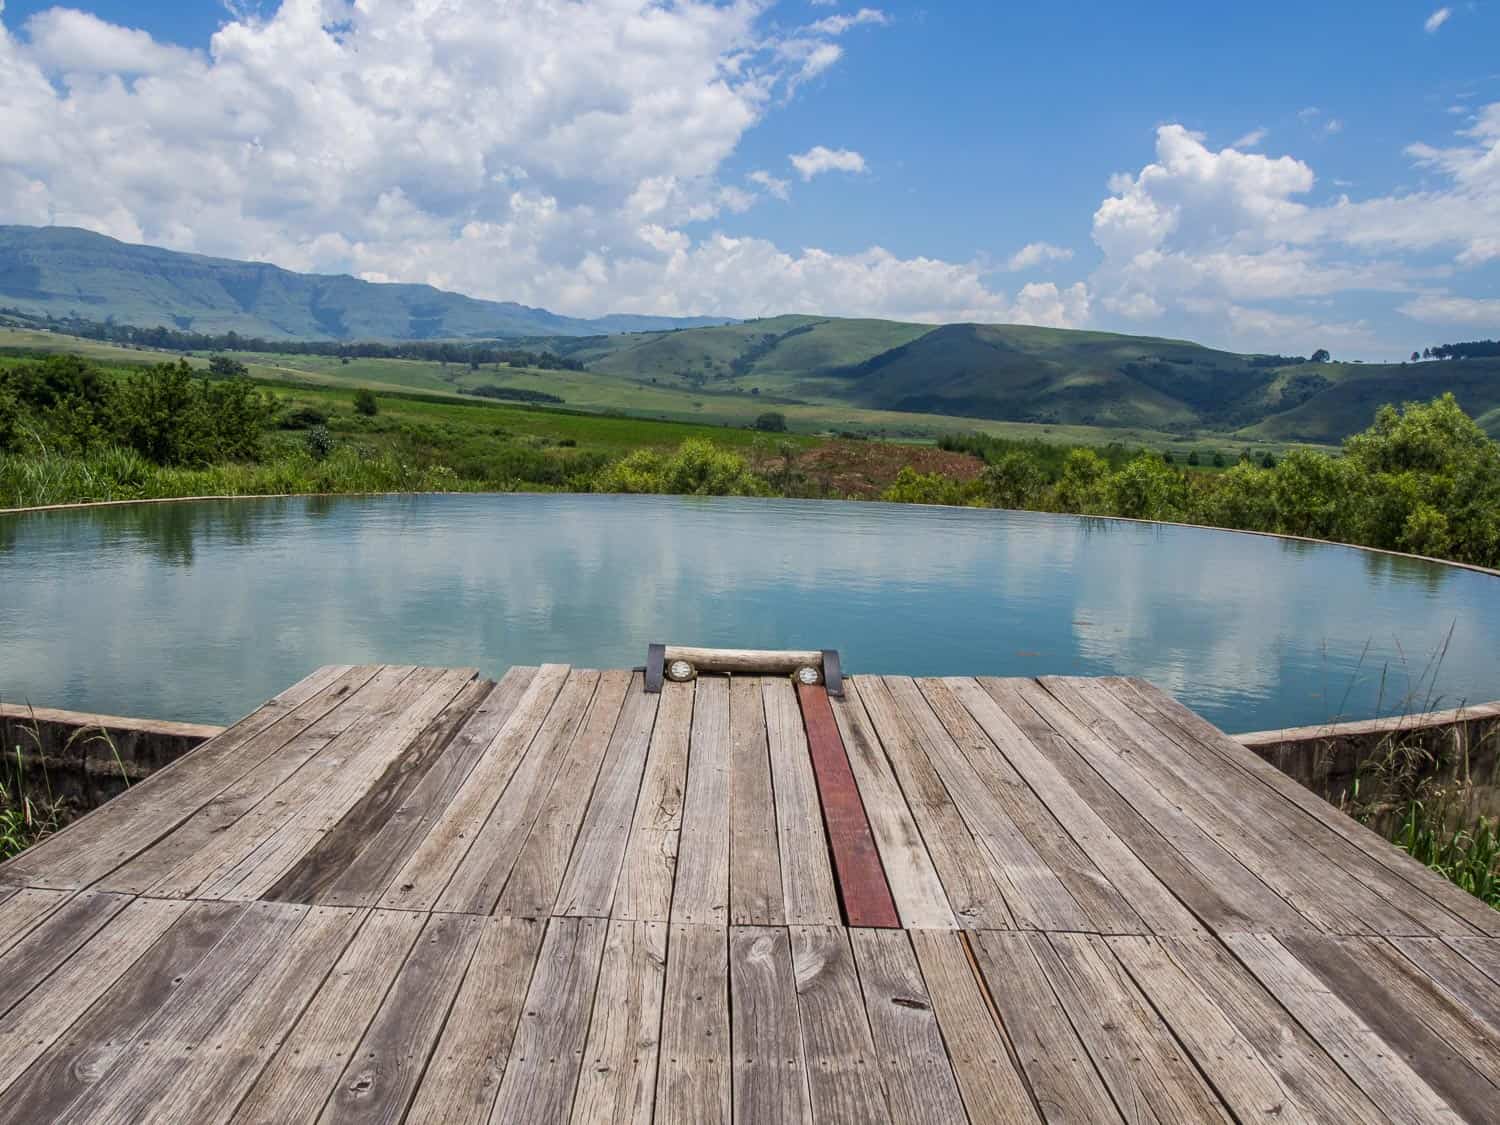 The natural pool at Inkosana Lodge in the Drakensberg Mountains, South Africa